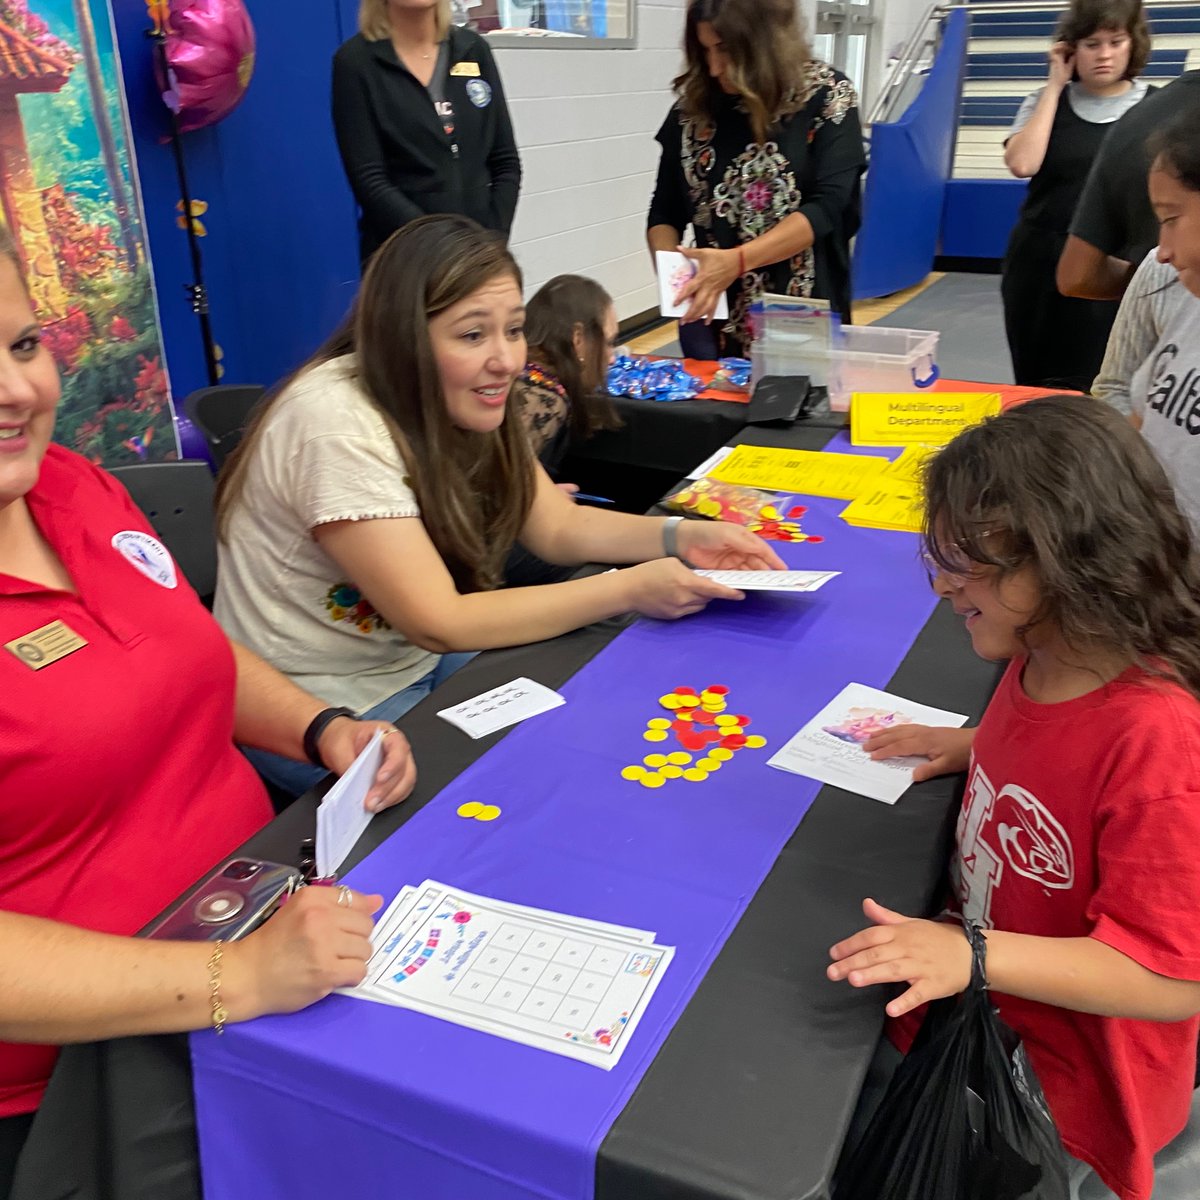 Math Night fue una noche de “Encanto”. Thanks to all the parents that came out to this event with their child.  Parents were given a list of excellent math games to engage in with their child at home. @CISD_ML @amyeckMLCisd @MsAMontemayor @ChannelviewISD